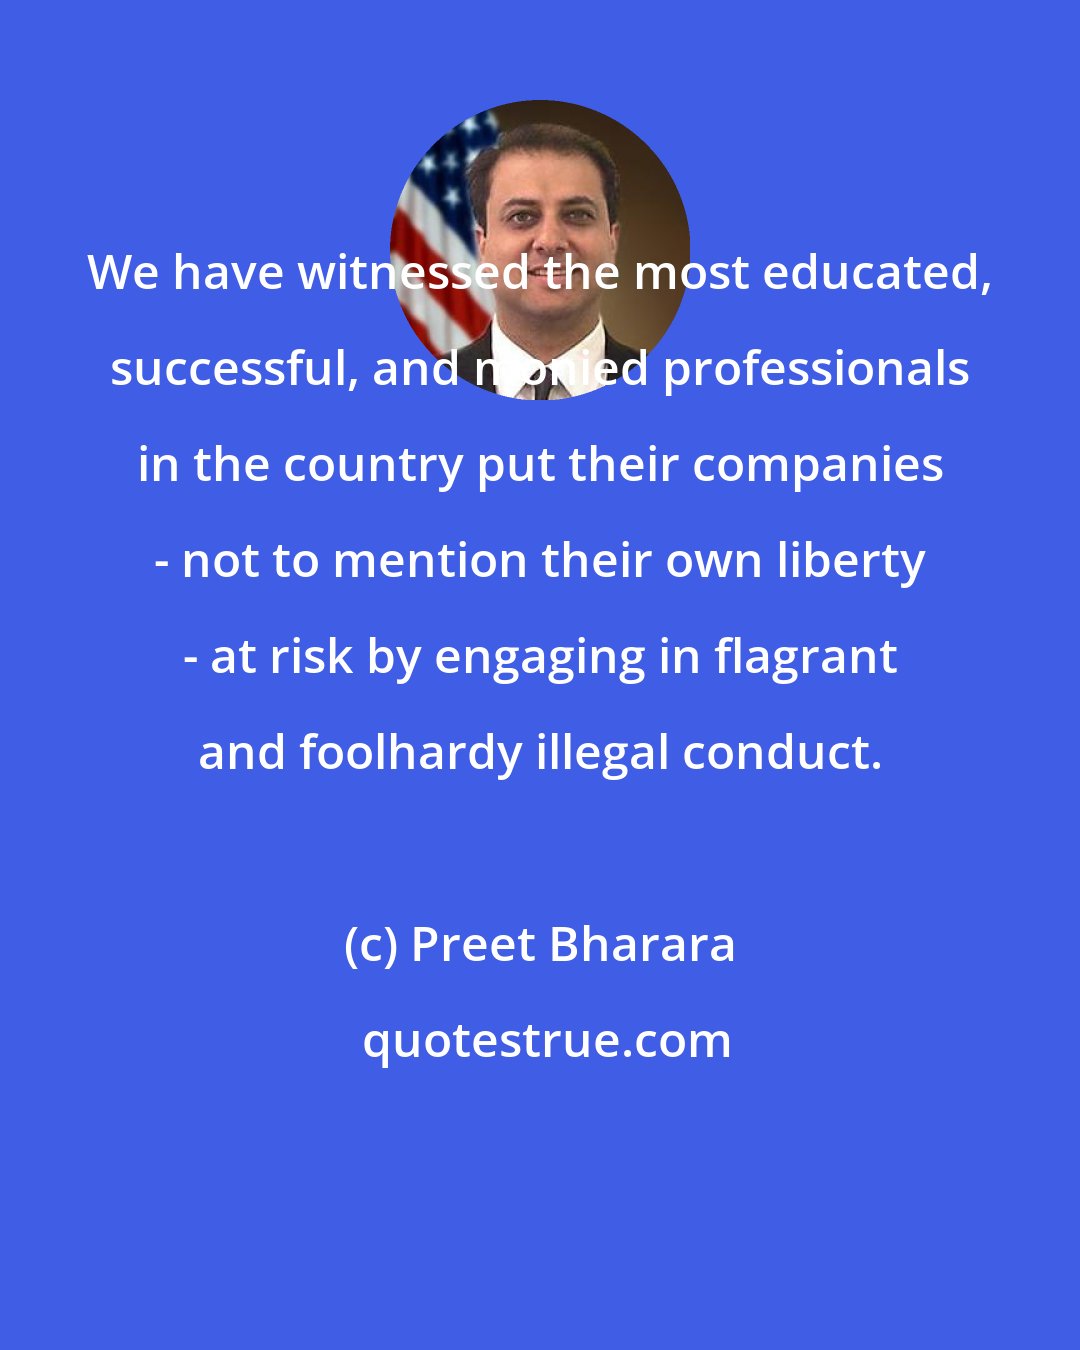 Preet Bharara: We have witnessed the most educated, successful, and monied professionals in the country put their companies - not to mention their own liberty - at risk by engaging in flagrant and foolhardy illegal conduct.